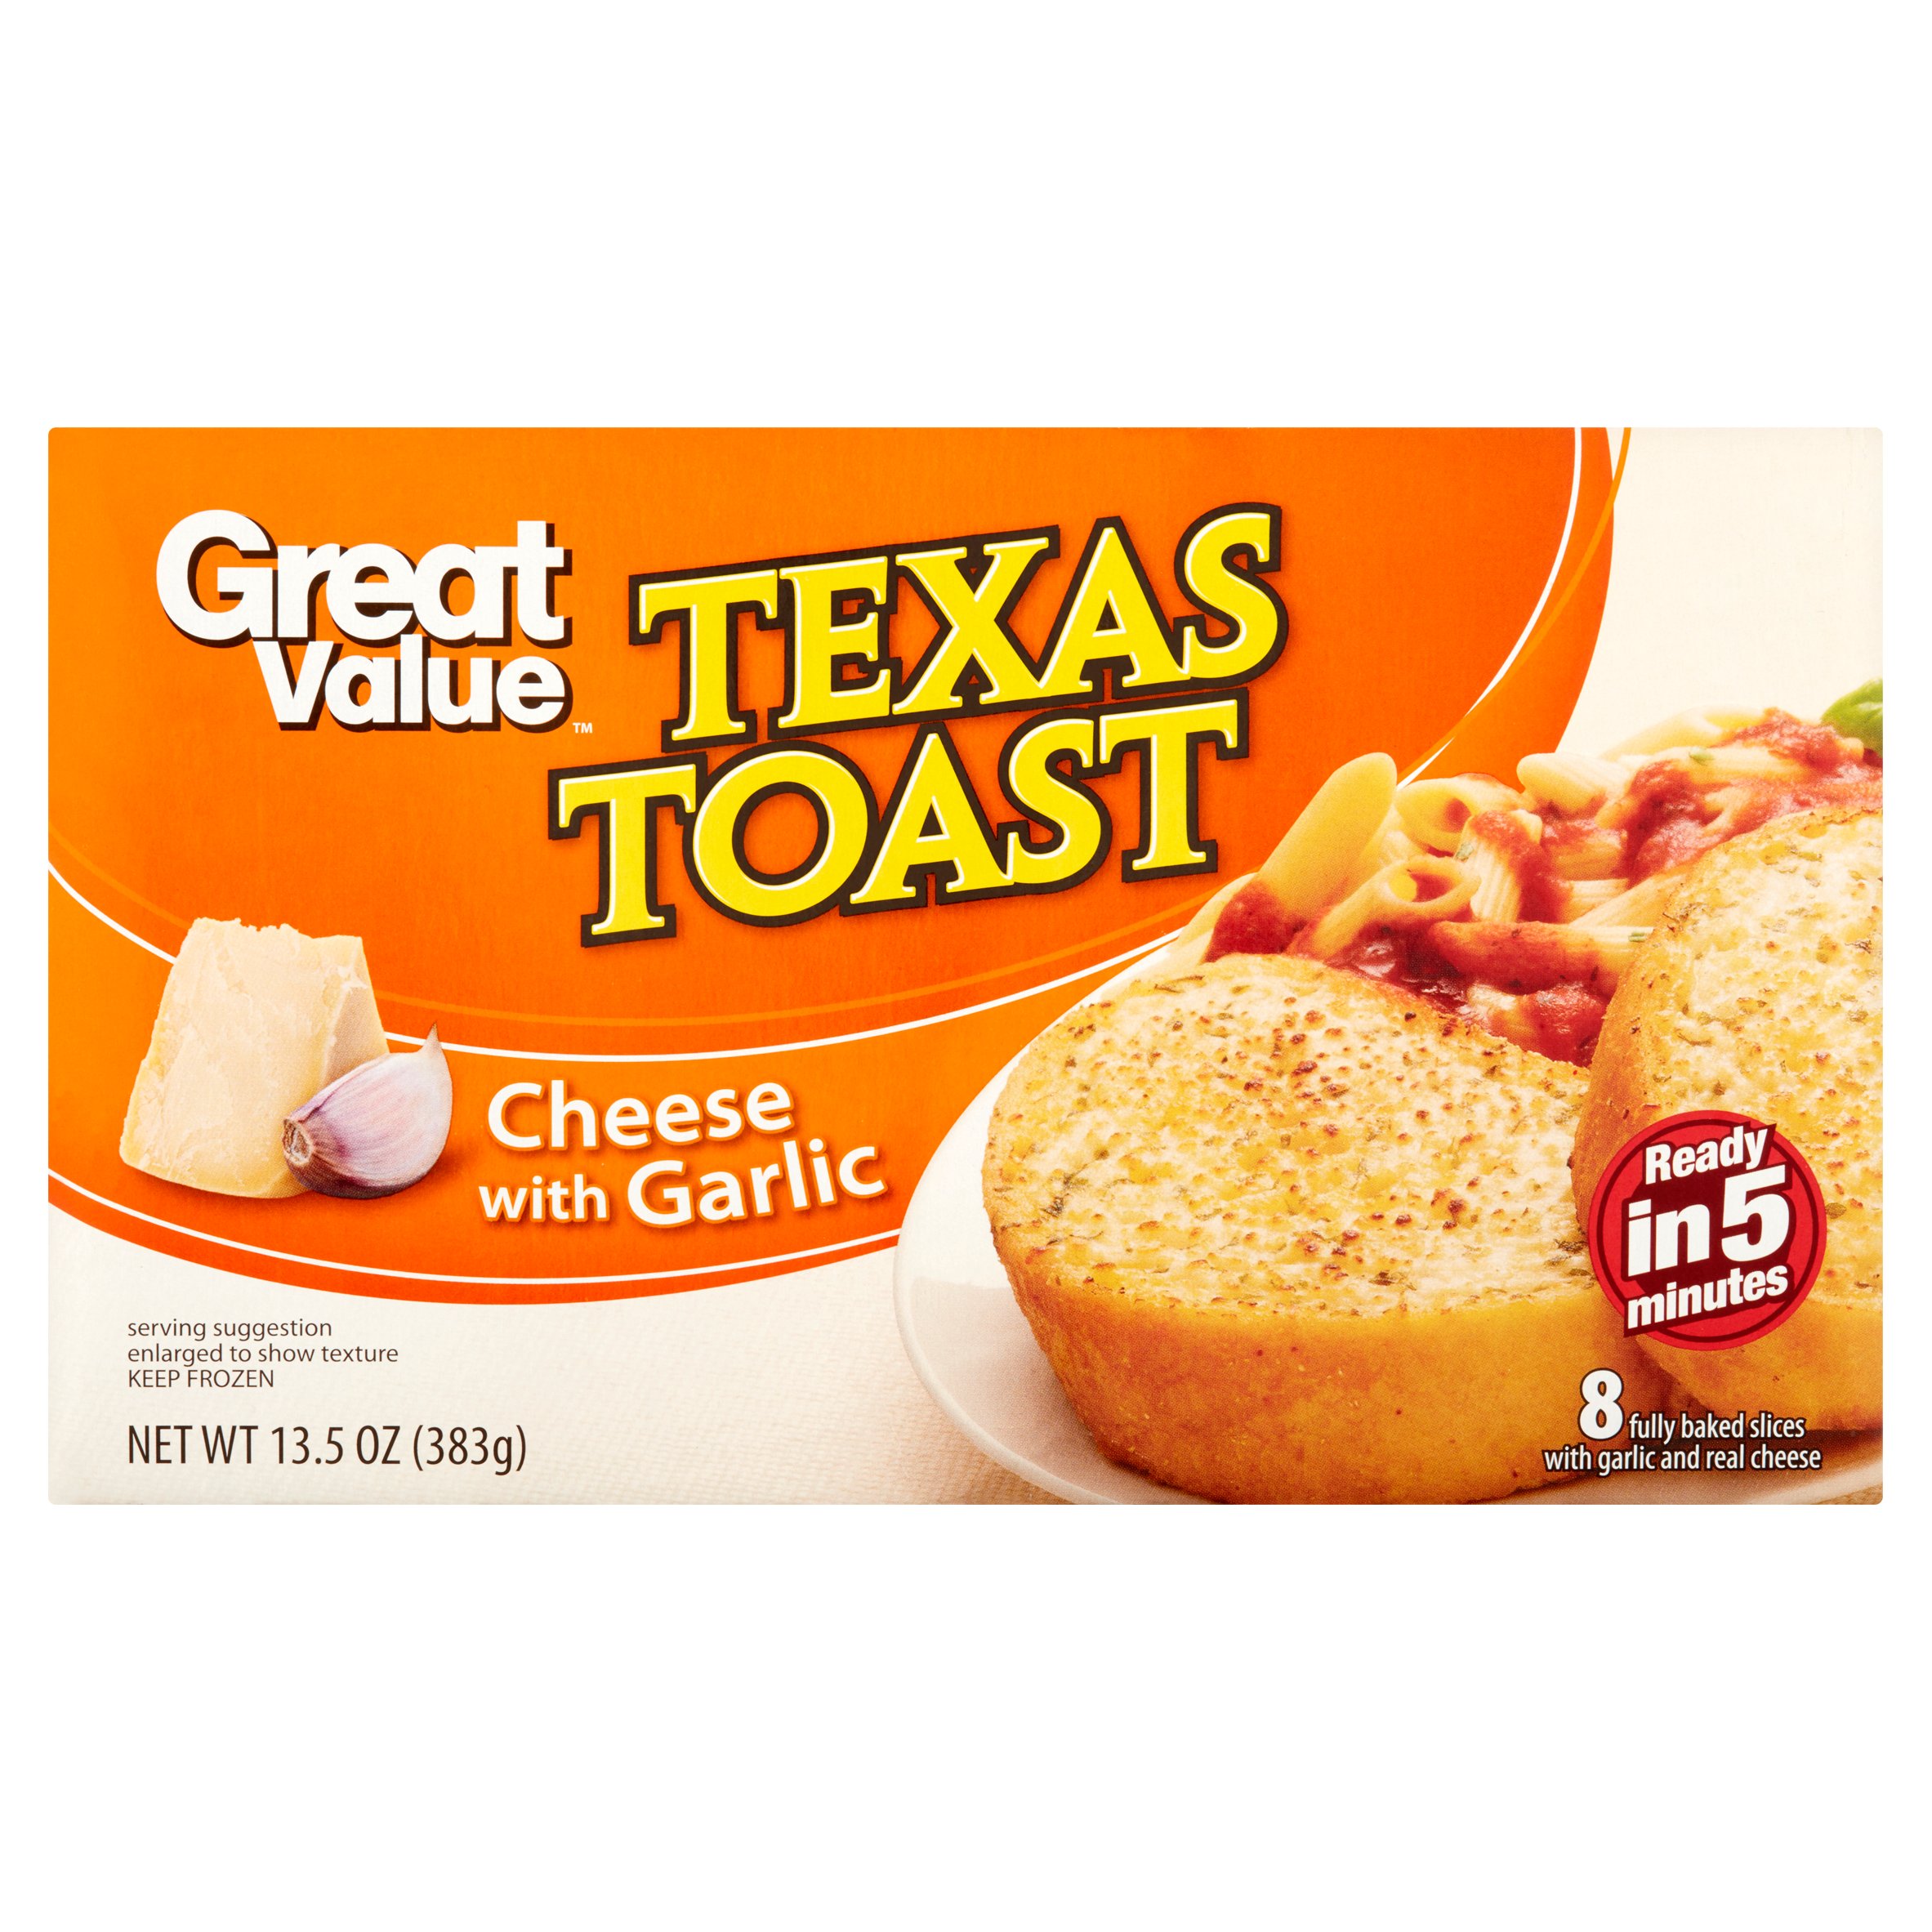 Great Value Cheese with Garlic Texas Toast, 13.5 Oz, 8 Count Image